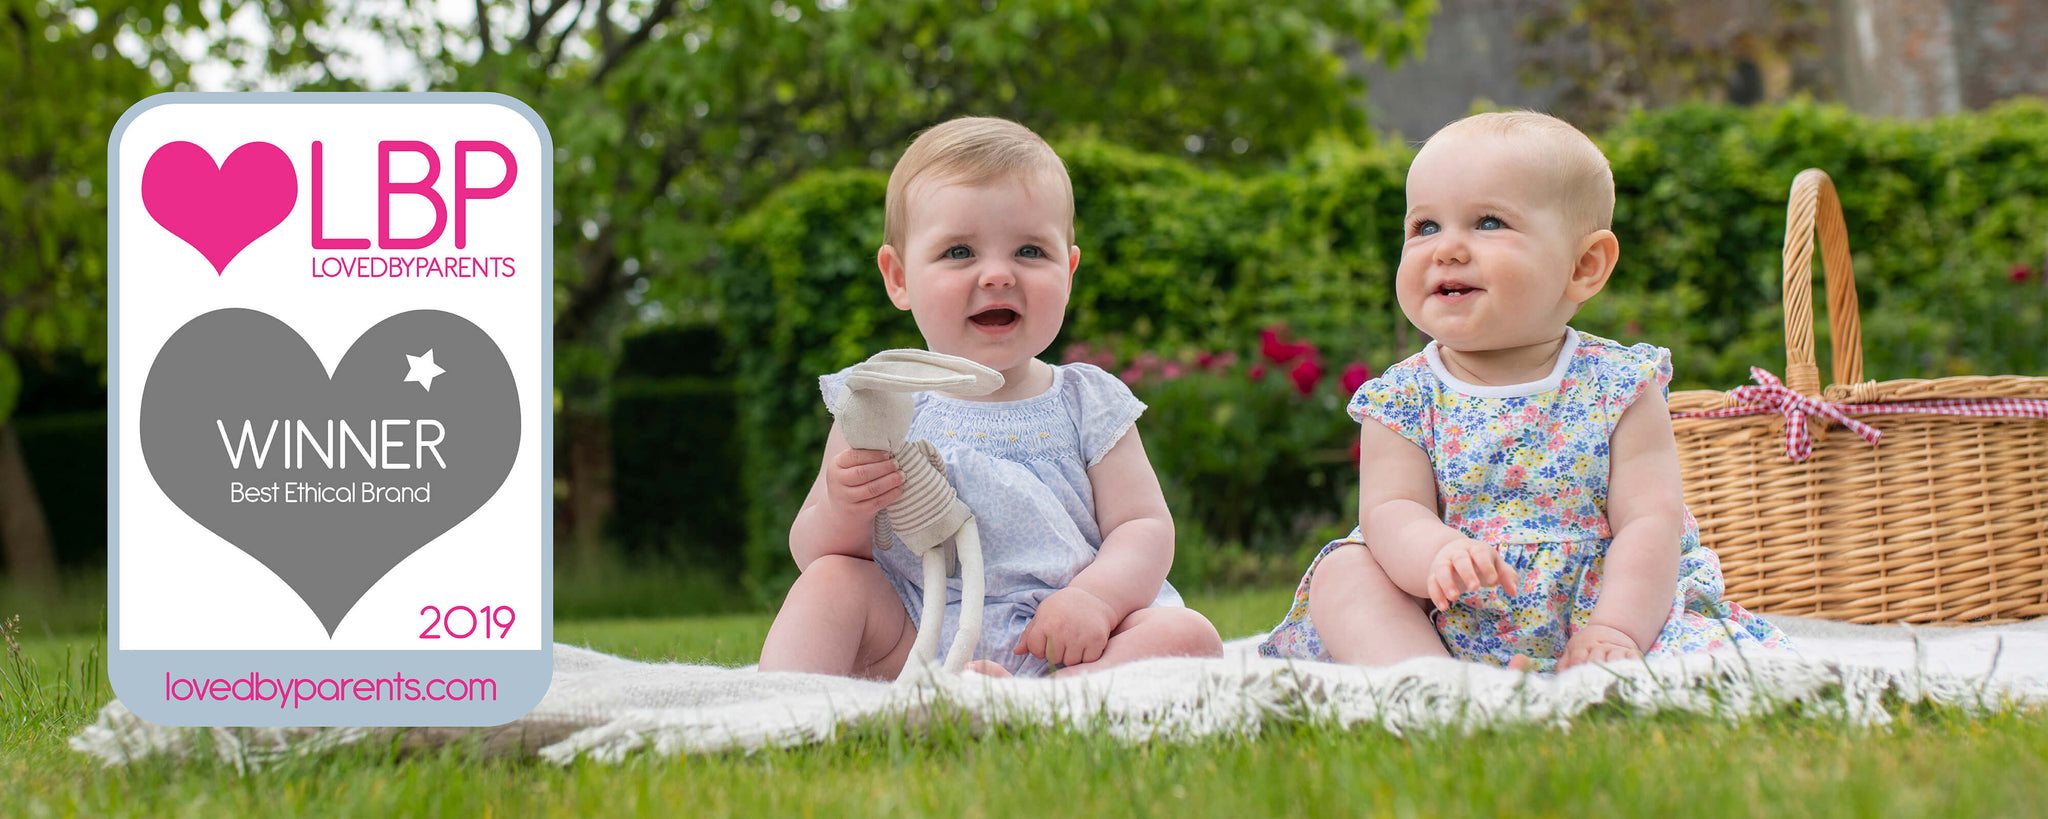 Babies sat on the grass with a Best Brand Loved by Parents award